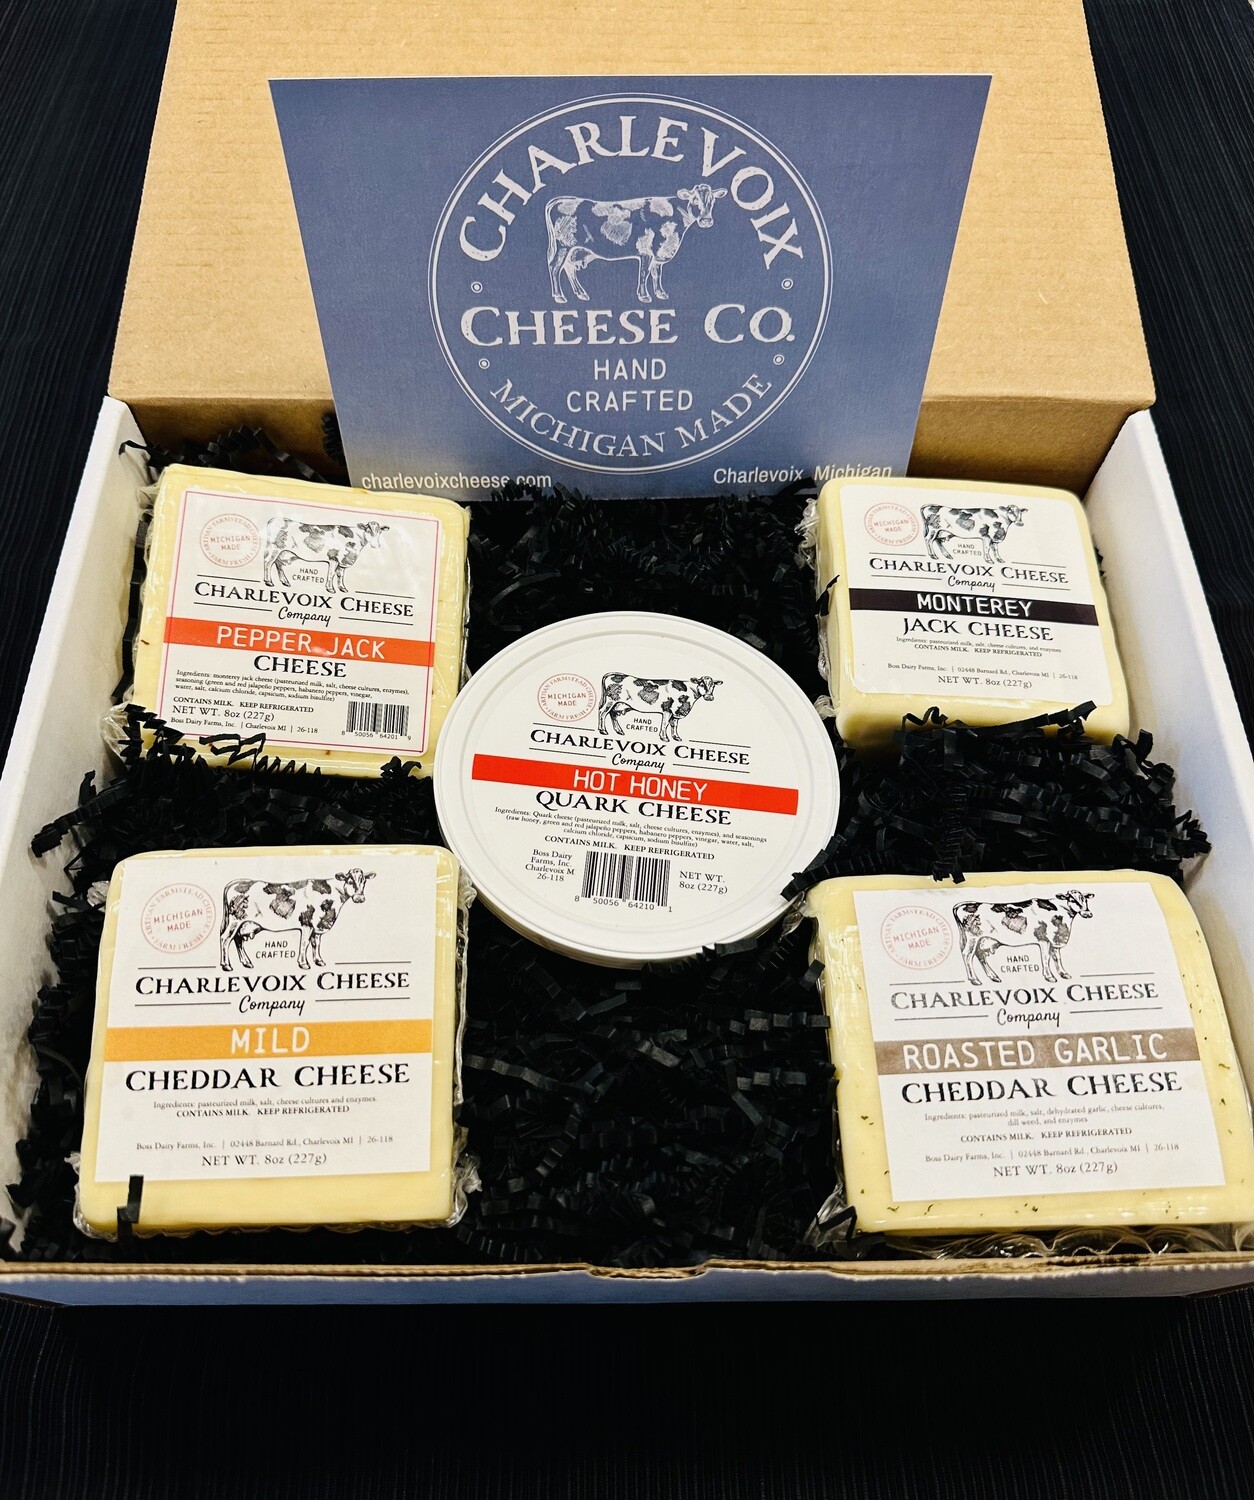 The Merry Cheese Gift Box